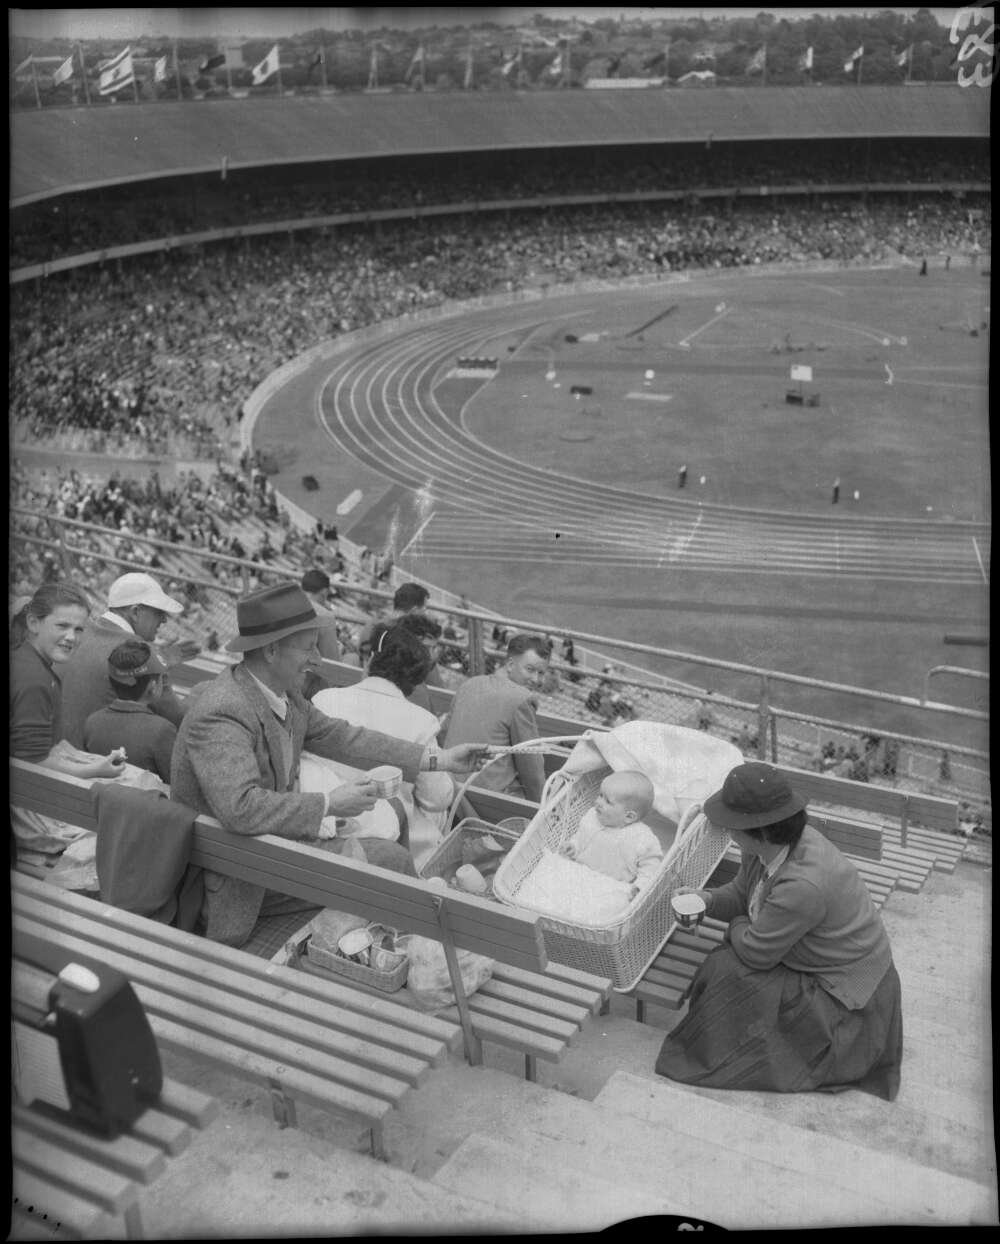 Family of three sitting in the crowded stands of a sports stadium while various events take place on the track and field. The parents seem to be enjoying a warm beverage while looking at their baby who lies in a stroller.